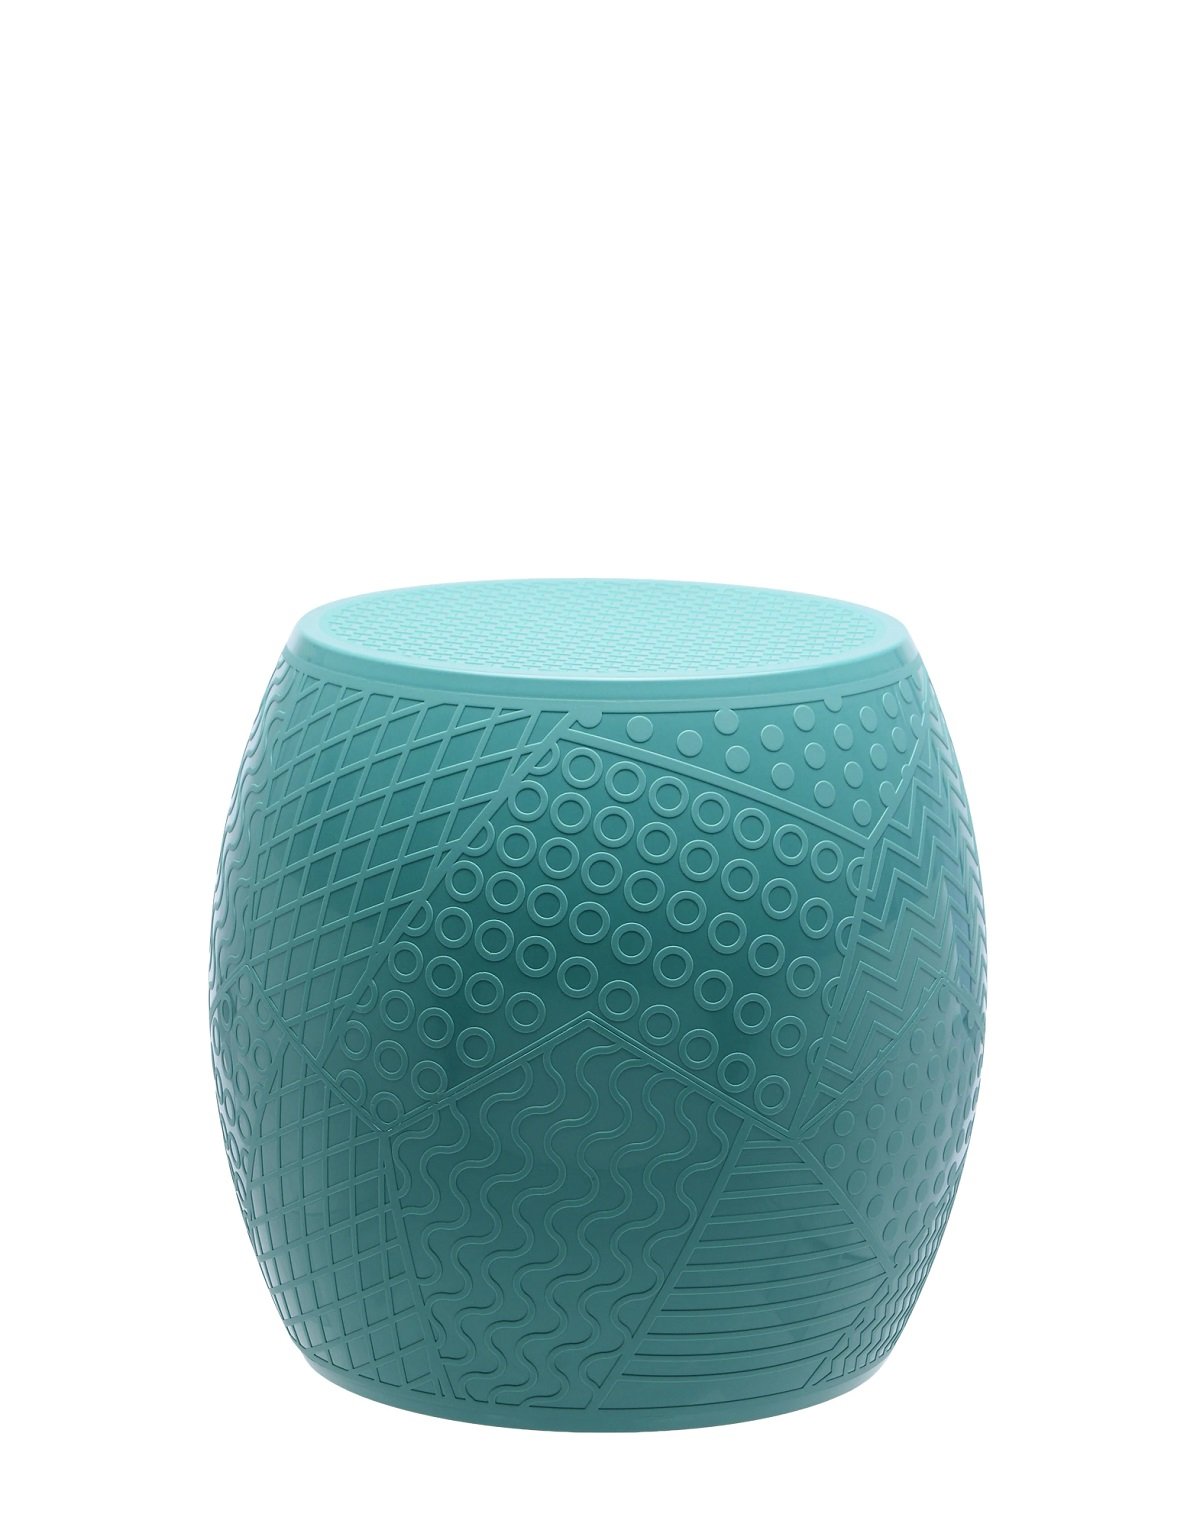 Roy Chinese-Style Stool from Kartell, designed by Alessandro Mendini